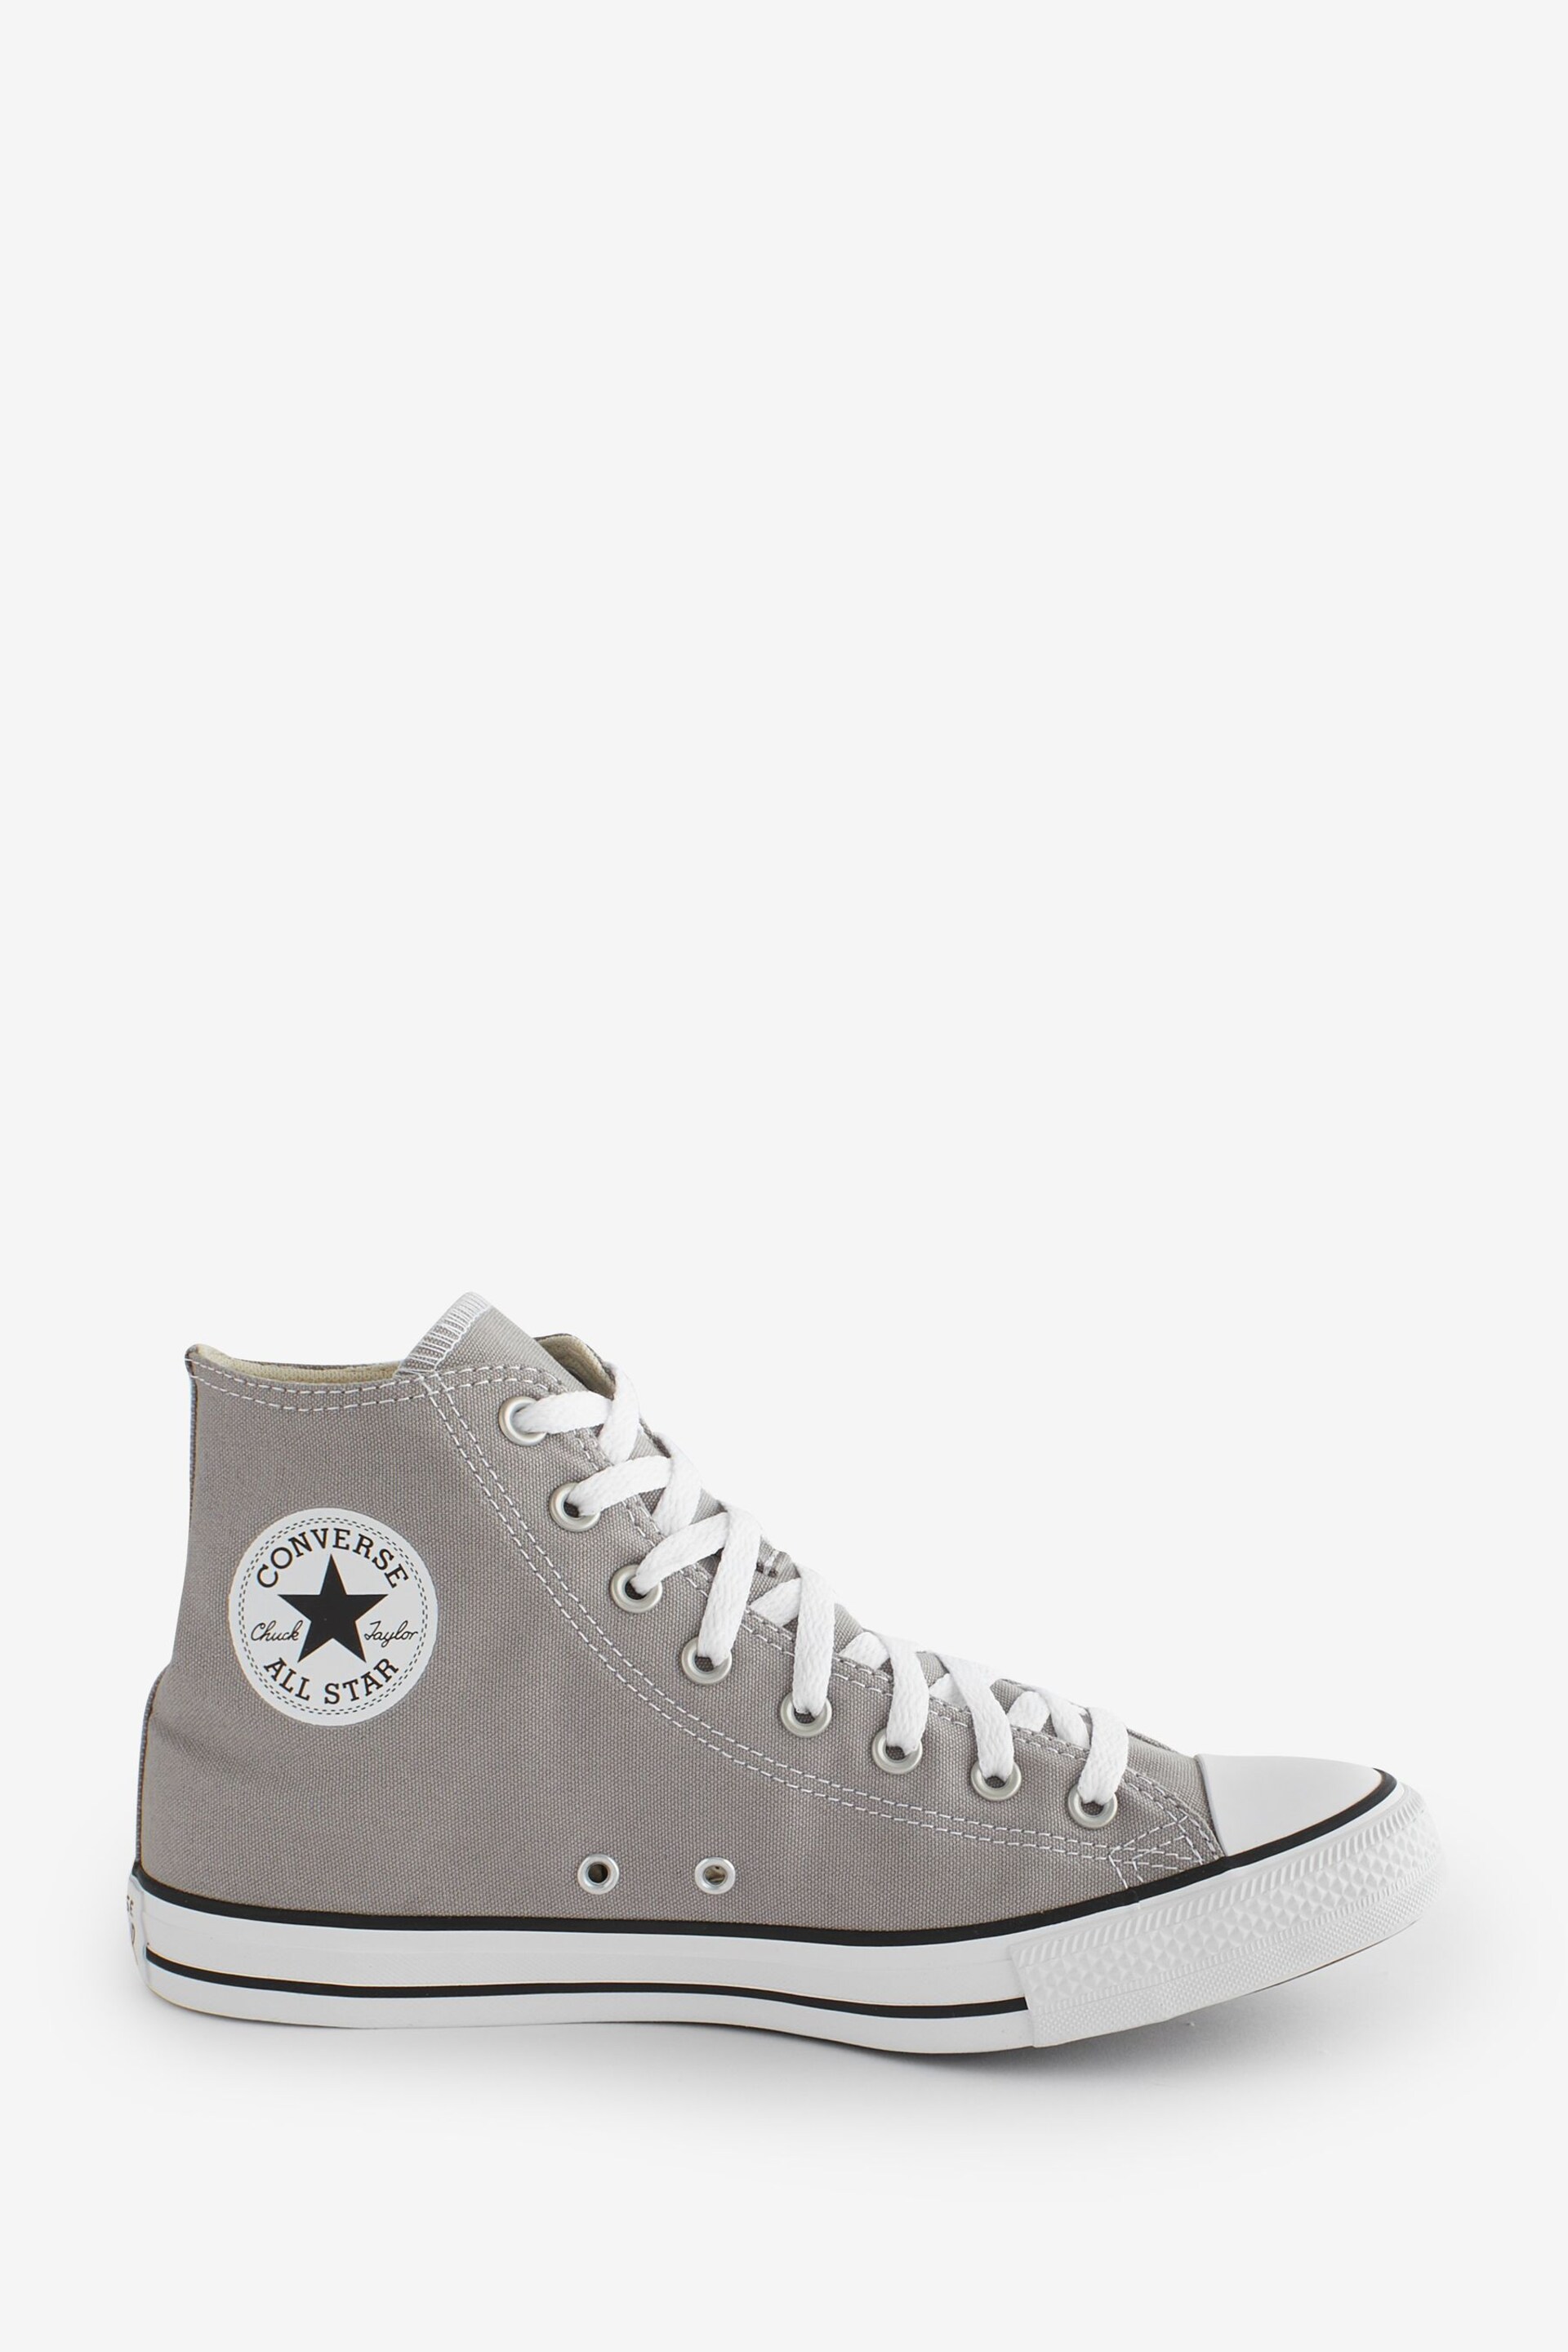 Converse Grey Chuck Taylor Classic High Top Trainers - Image 1 of 9